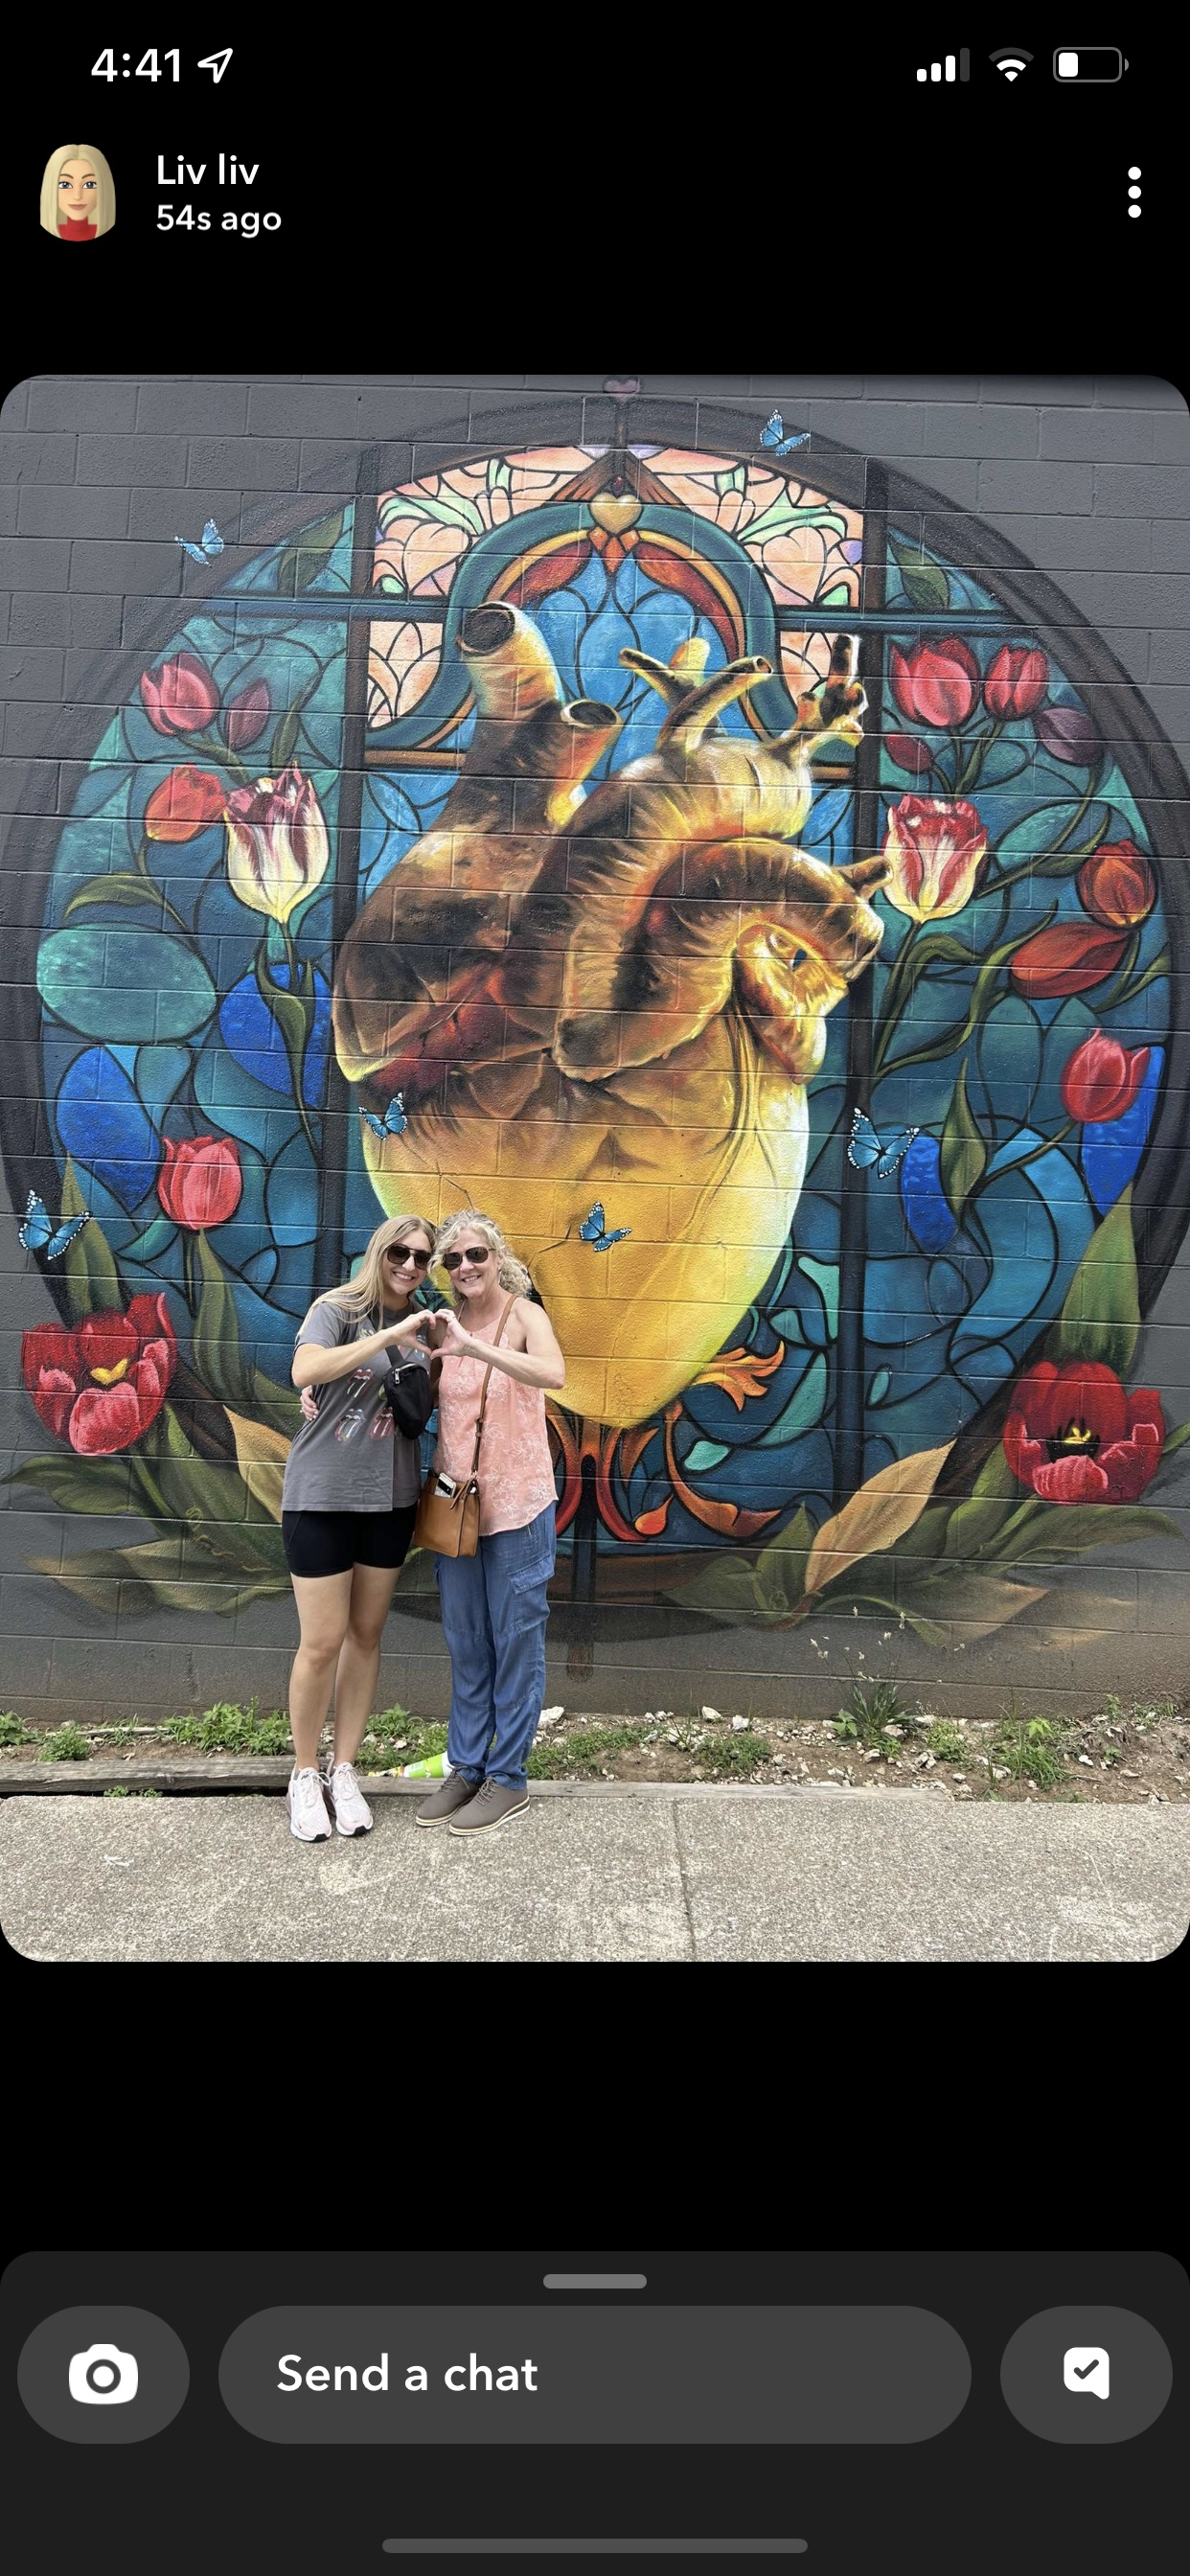 Our friends stopped at the “Broken hearts of gold” wall in Nashville!